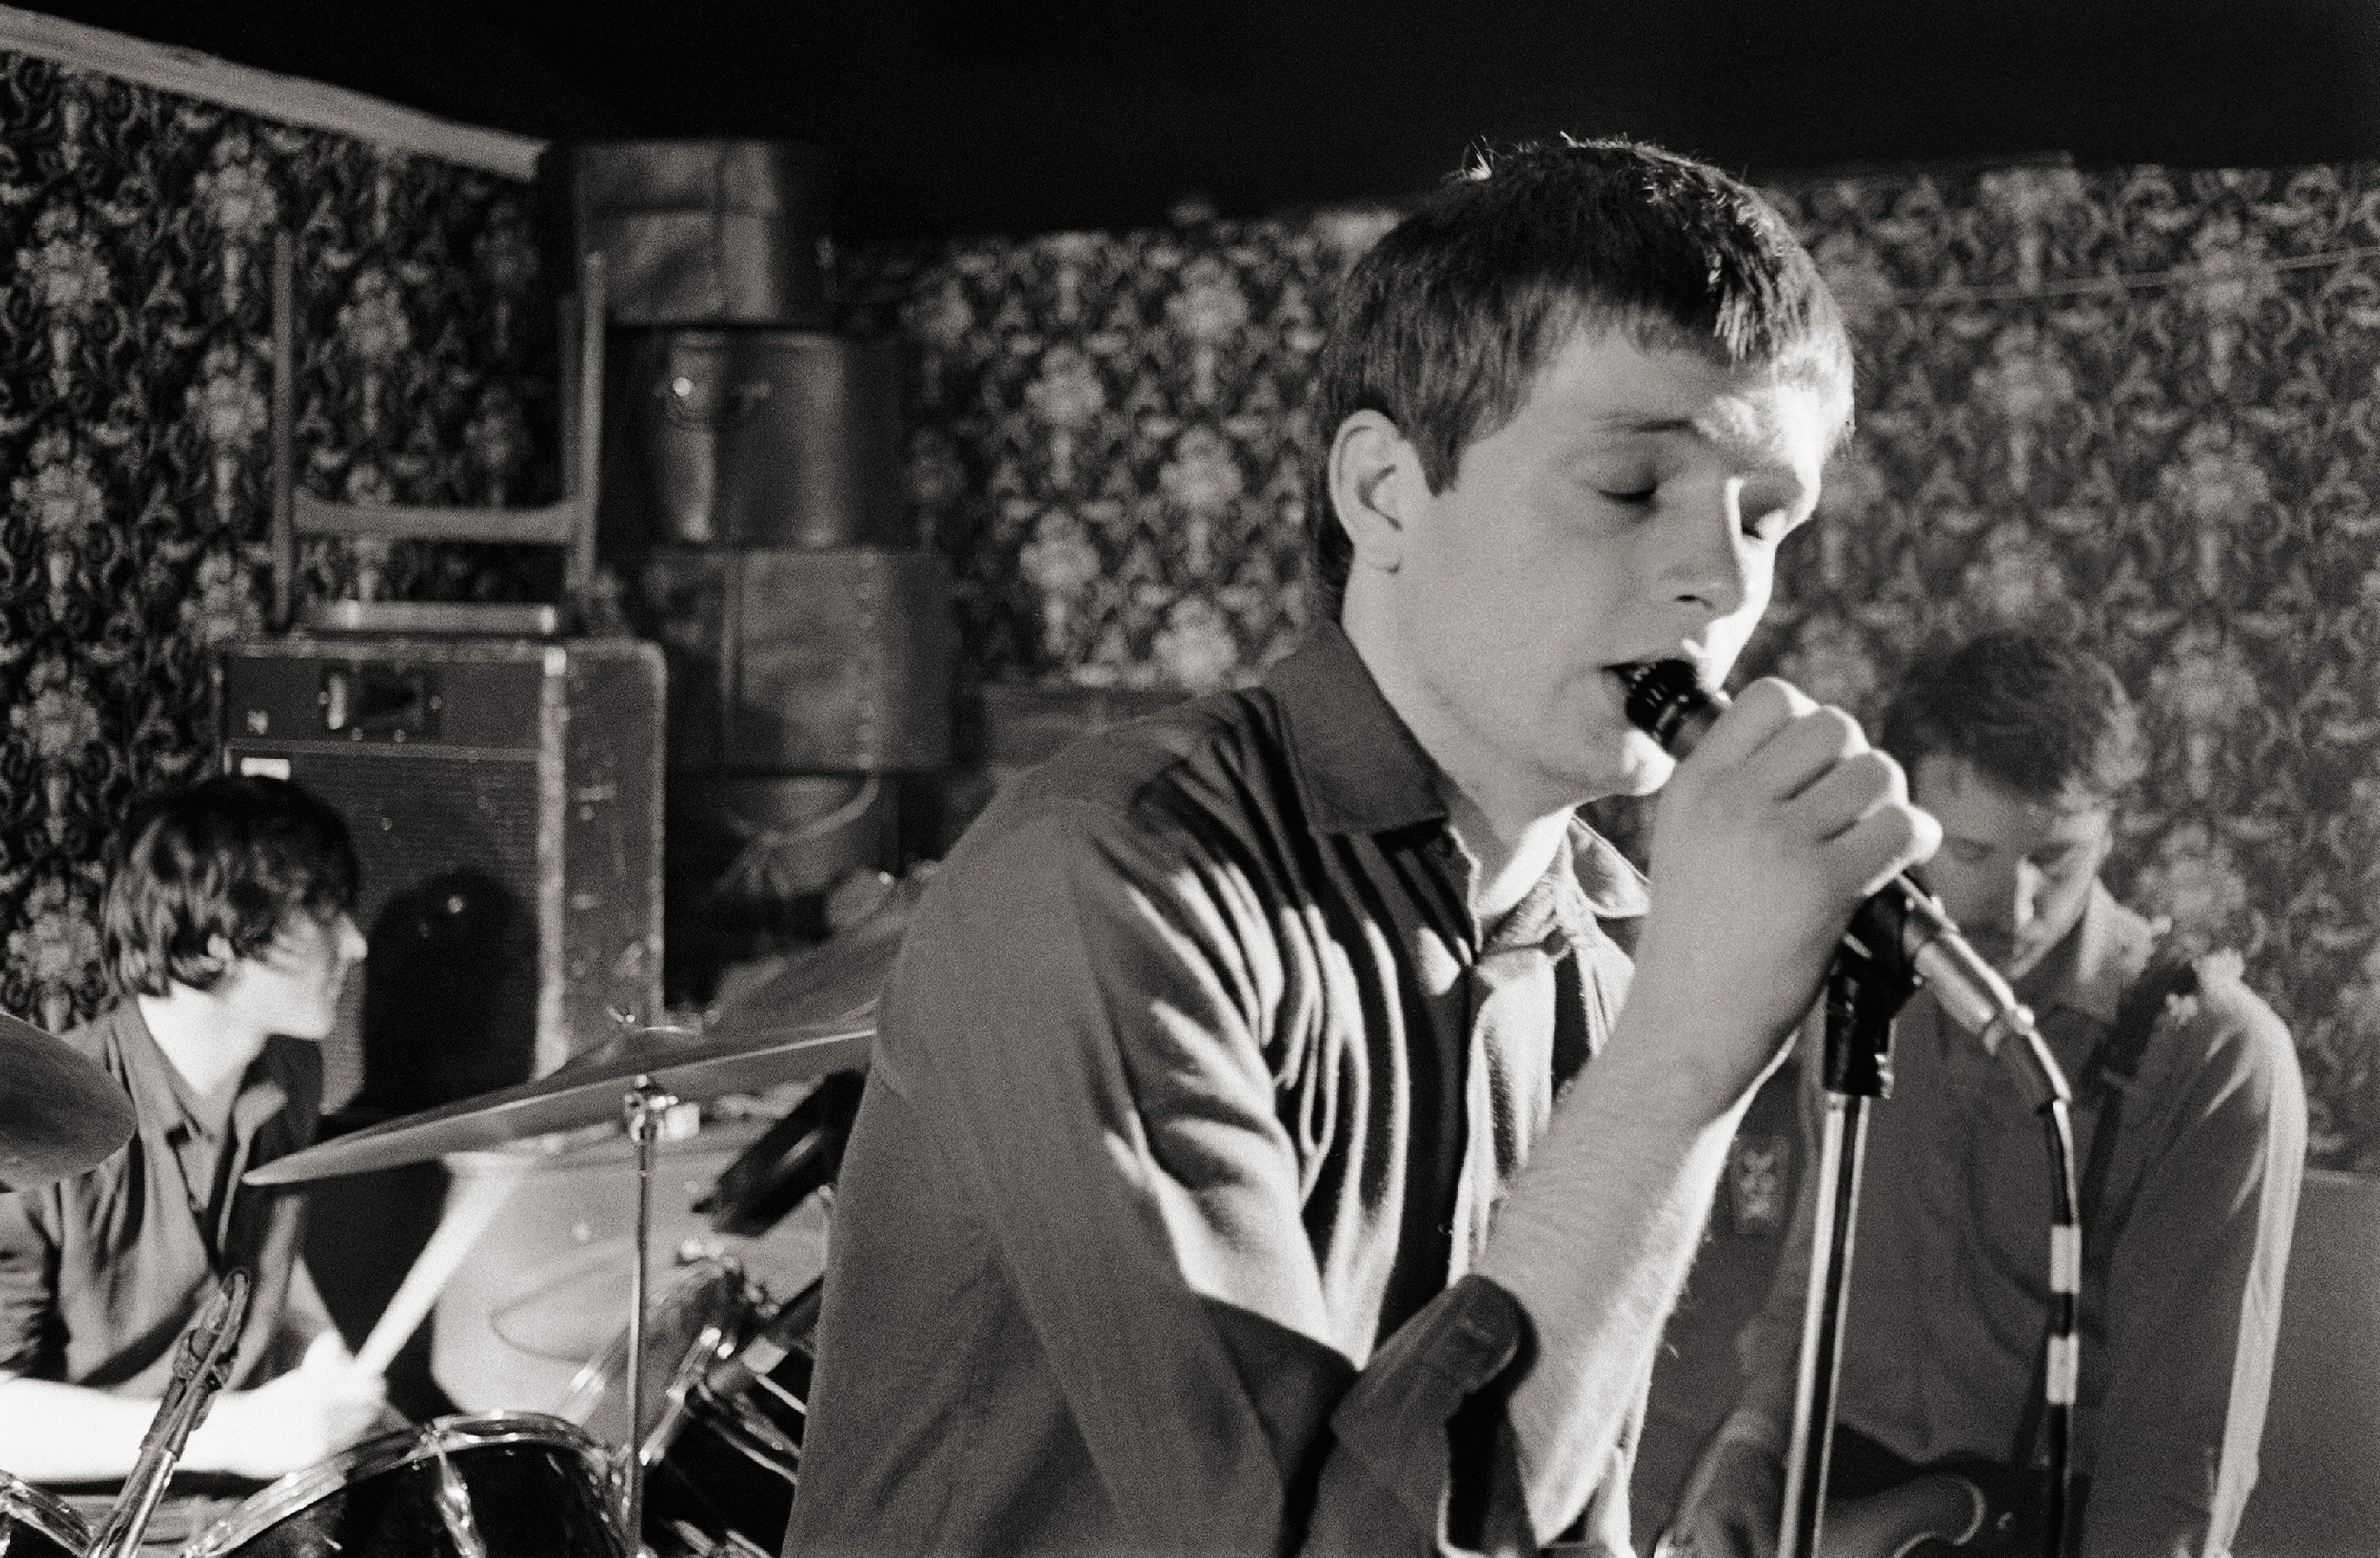 <p>A pioneer of the post-punk genre, Joy Division started out with a harder sound. The moodiness of frontman Ian Curtis offered a <a href="https://www.youtube.com/watch?v=zuuObGsB0No">more melodic vibe</a> that was followed by the likes of The Cure and The Smiths. However, Curtis' demeanor had plenty to do with a myriad of personal issues, plus dealing with epilepsy and depression. Making him one of the more misinterpreted musicians of the time, who struggled to deal with the group's rising success. Sadly, Curtis took his own life in 1980, at just 23 years old.</p><p>You may also like: <a href='https://www.yardbarker.com/entertainment/articles/the_20_best_sitcom_villains_031924/s1__39186102'>The 20 best sitcom villains</a></p>